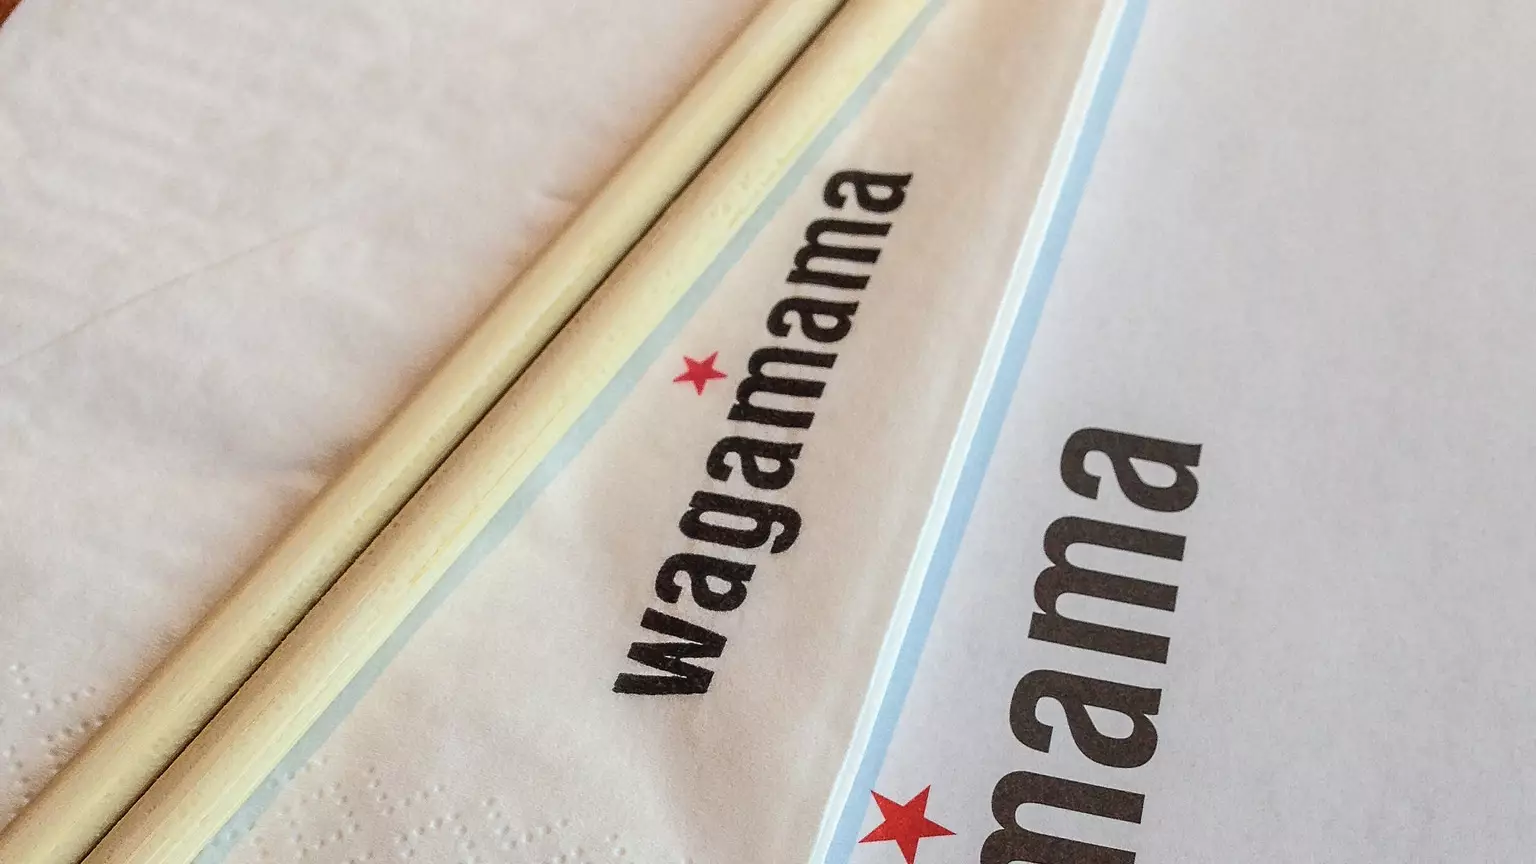 ​Wagamama Apologises For Telling Staff ‘No Calling In Sick’ Over Christmas